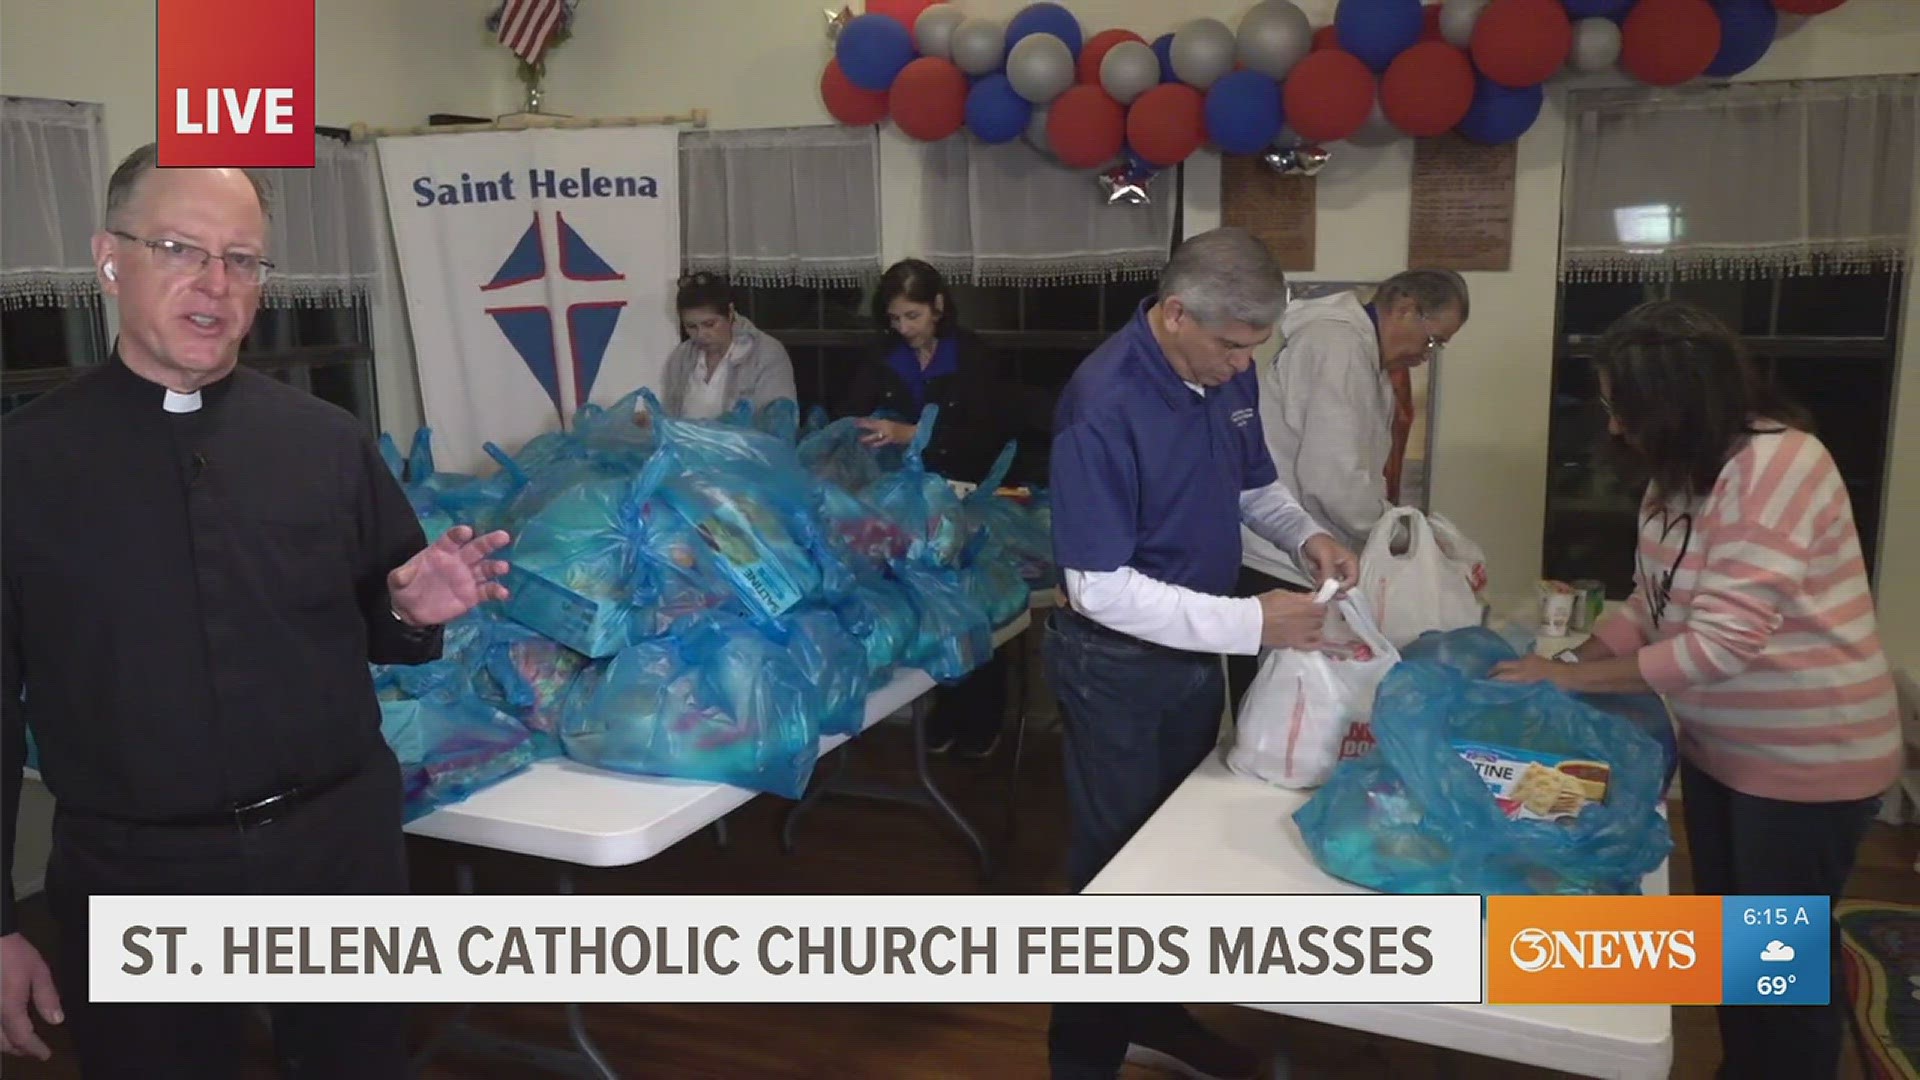 The church holds a massive food drive on the last Wednesday of every month, with donations coming from parishioners.